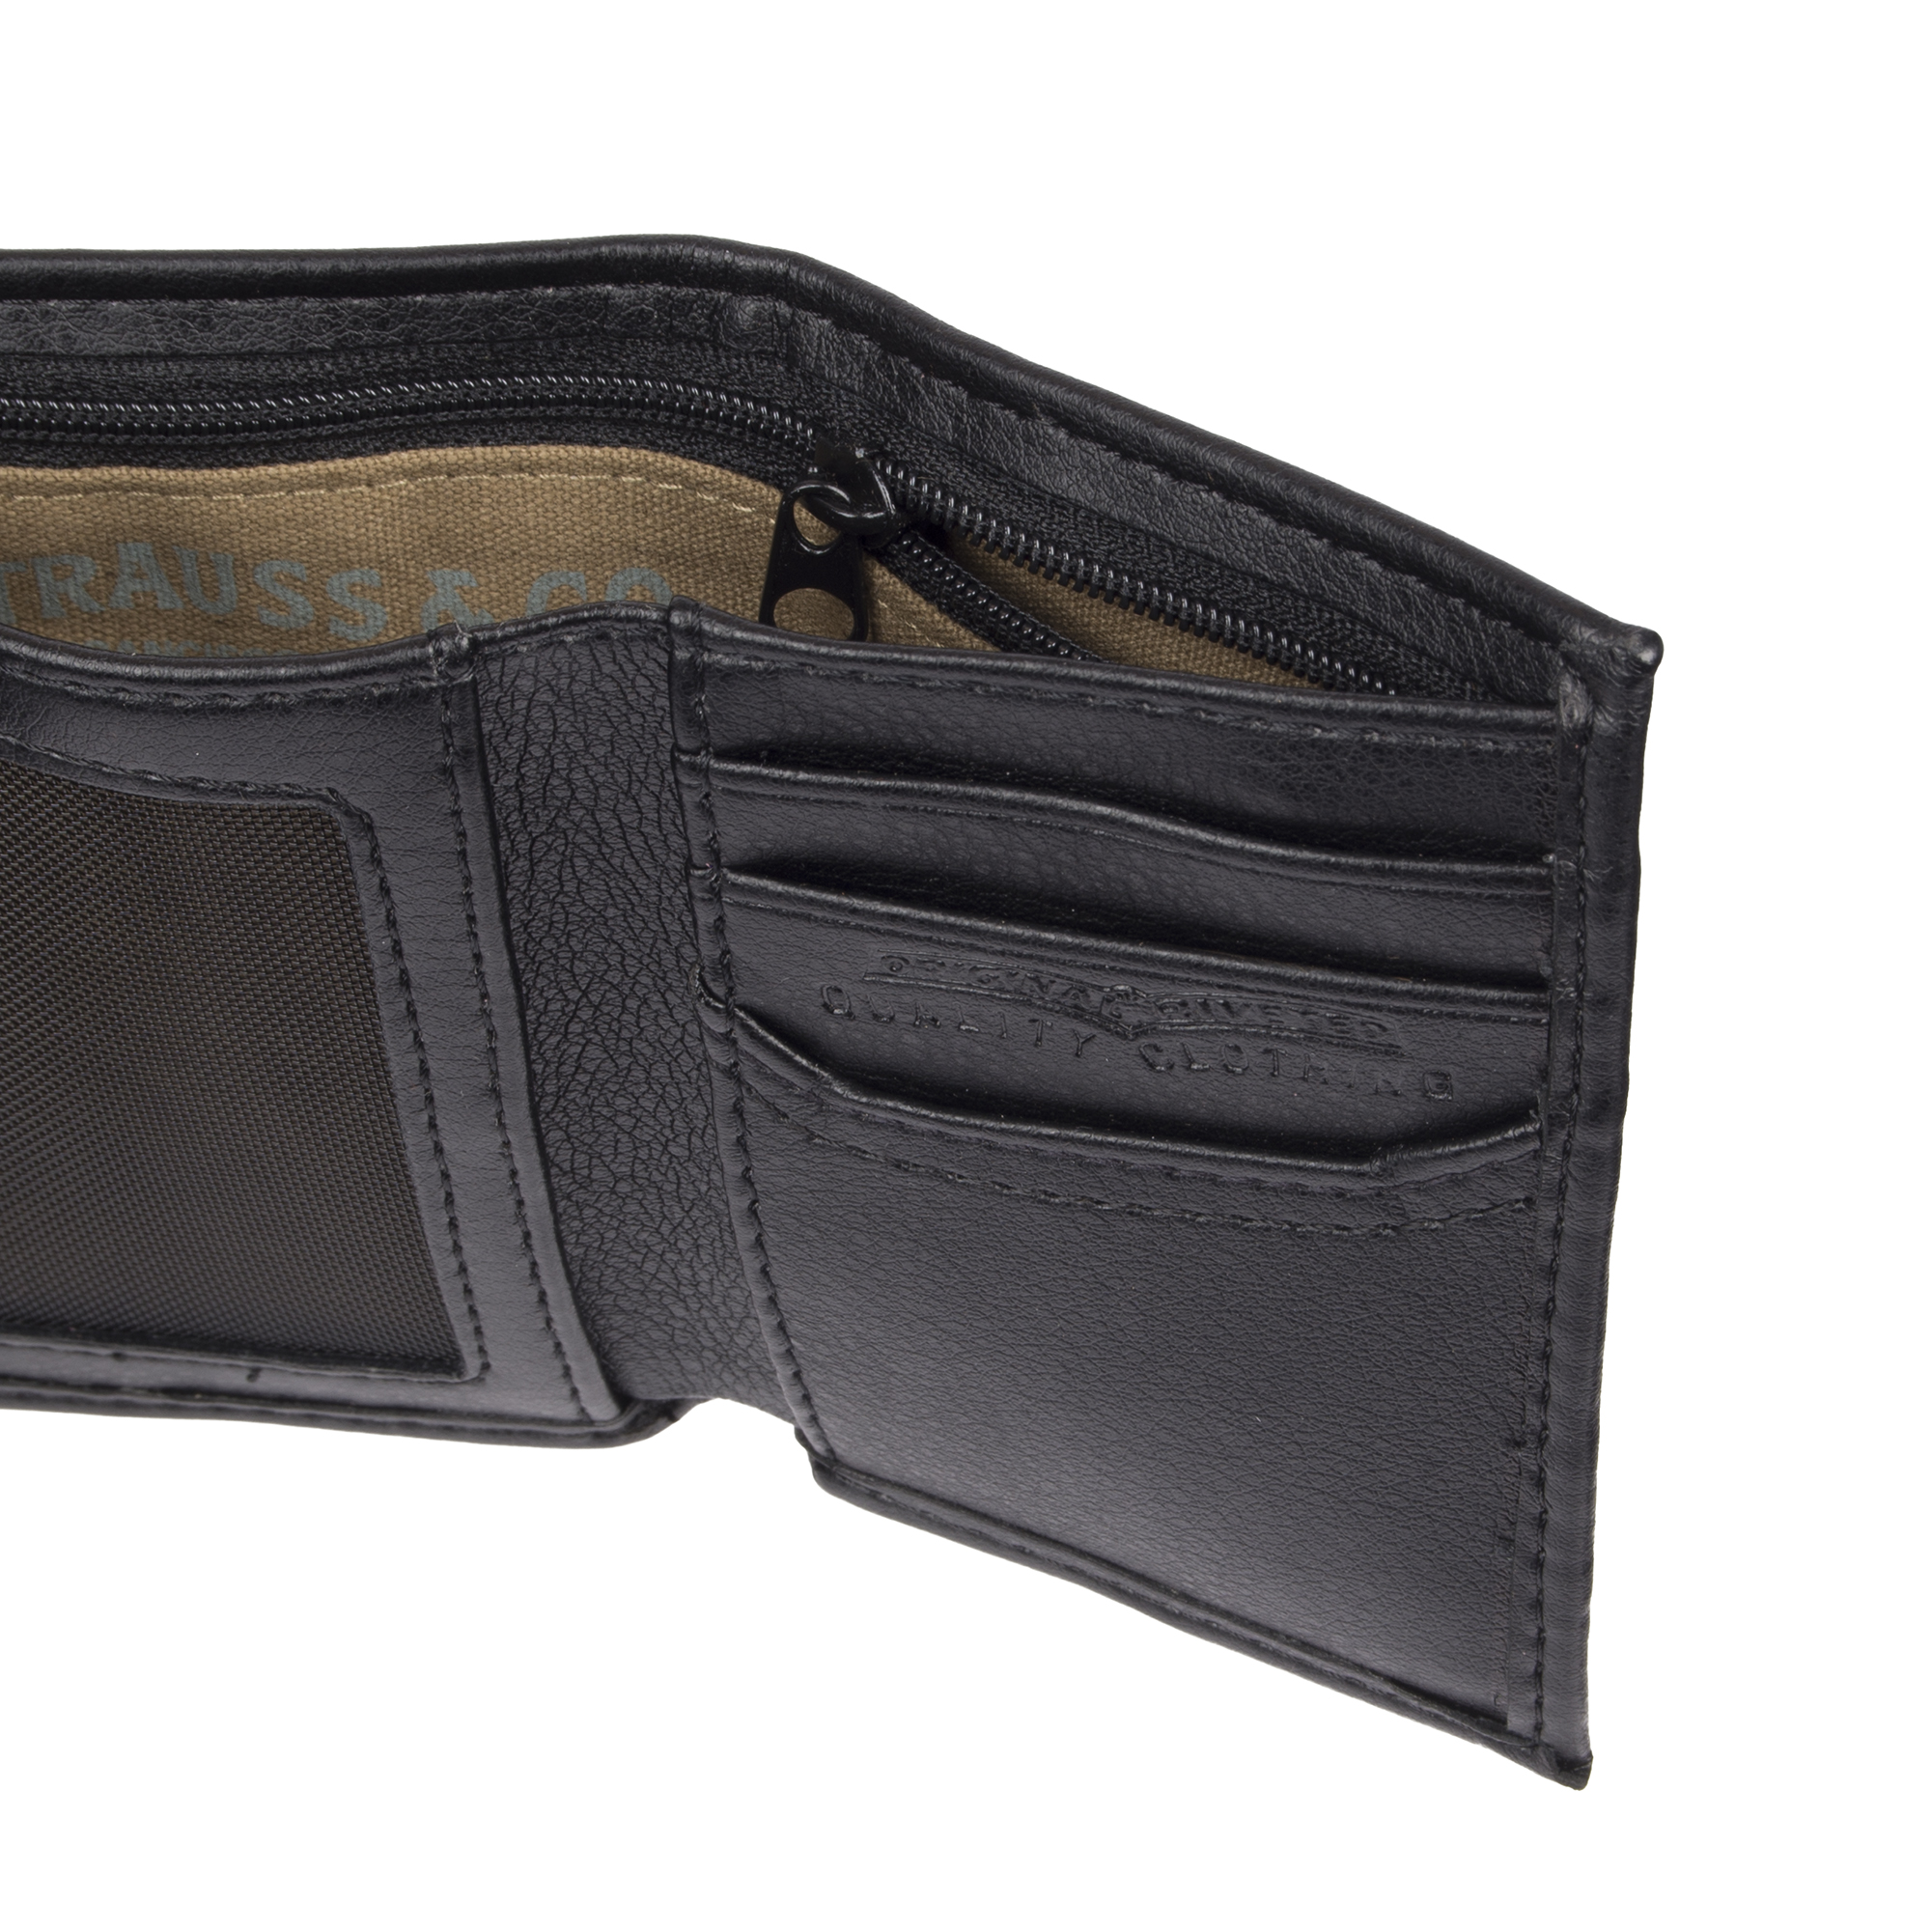 Levi's Men's Black RFID Trifold Wallet with Interior Zipper - image 4 of 5